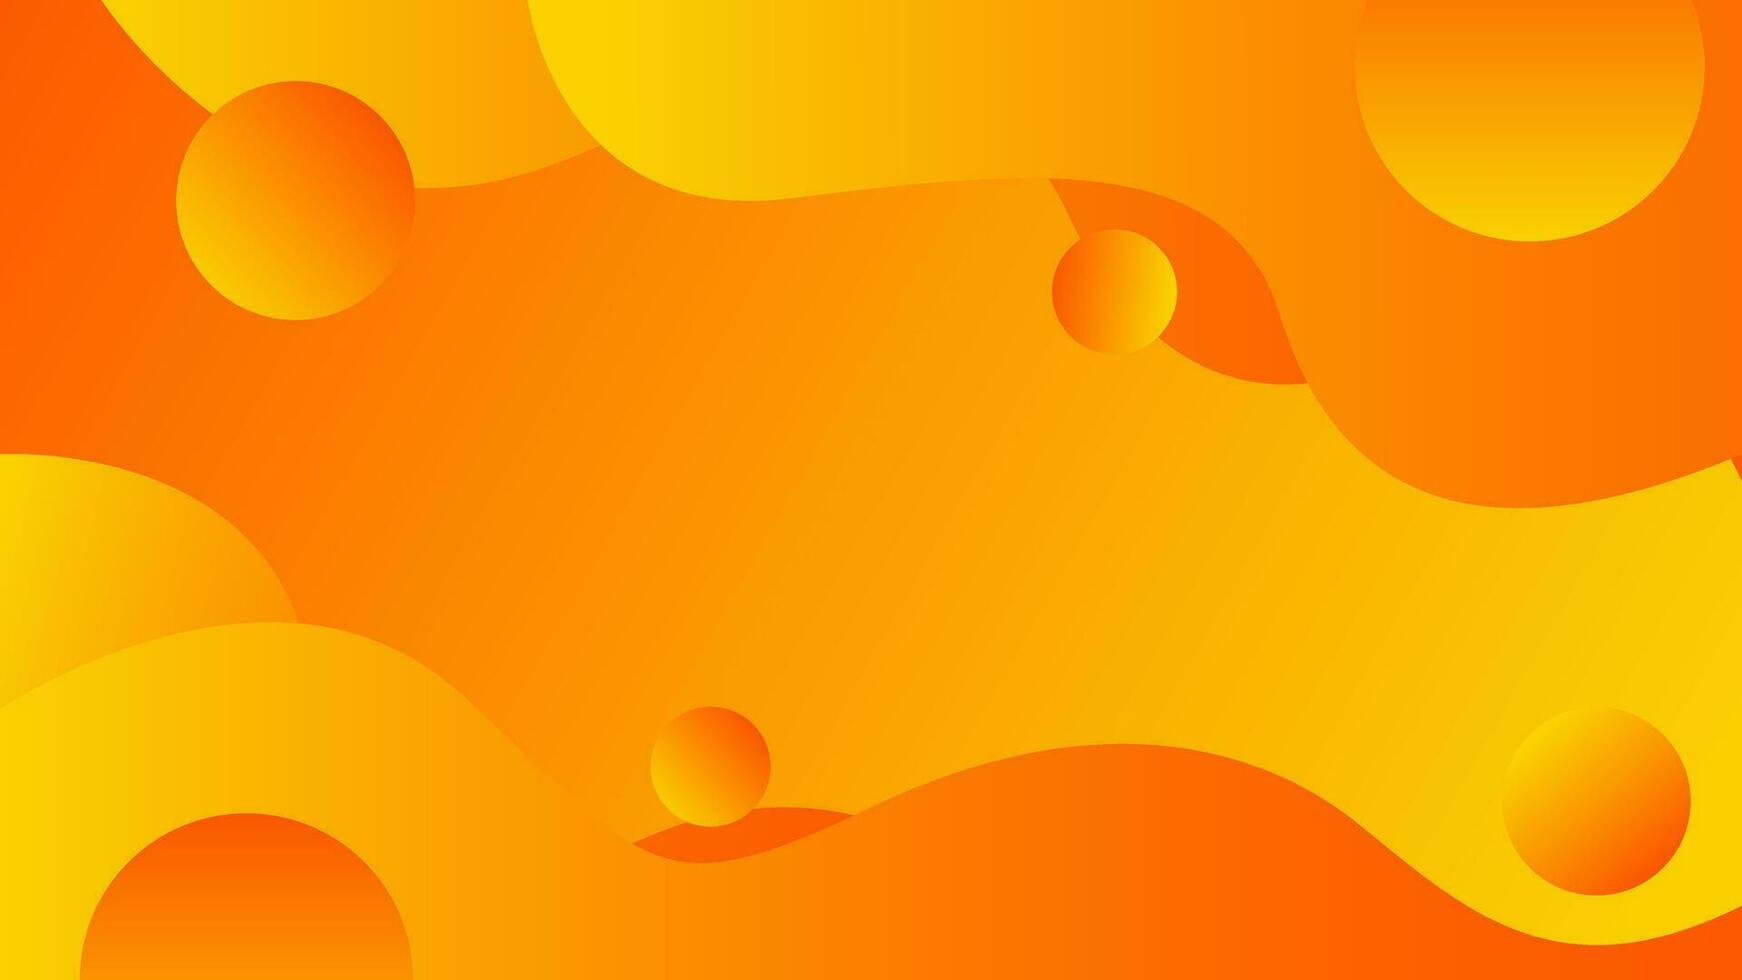 Abstract Gradient orange background with wavy and circle shape. Suitable for wallpapers, banners, events, templates, pages, and others vector